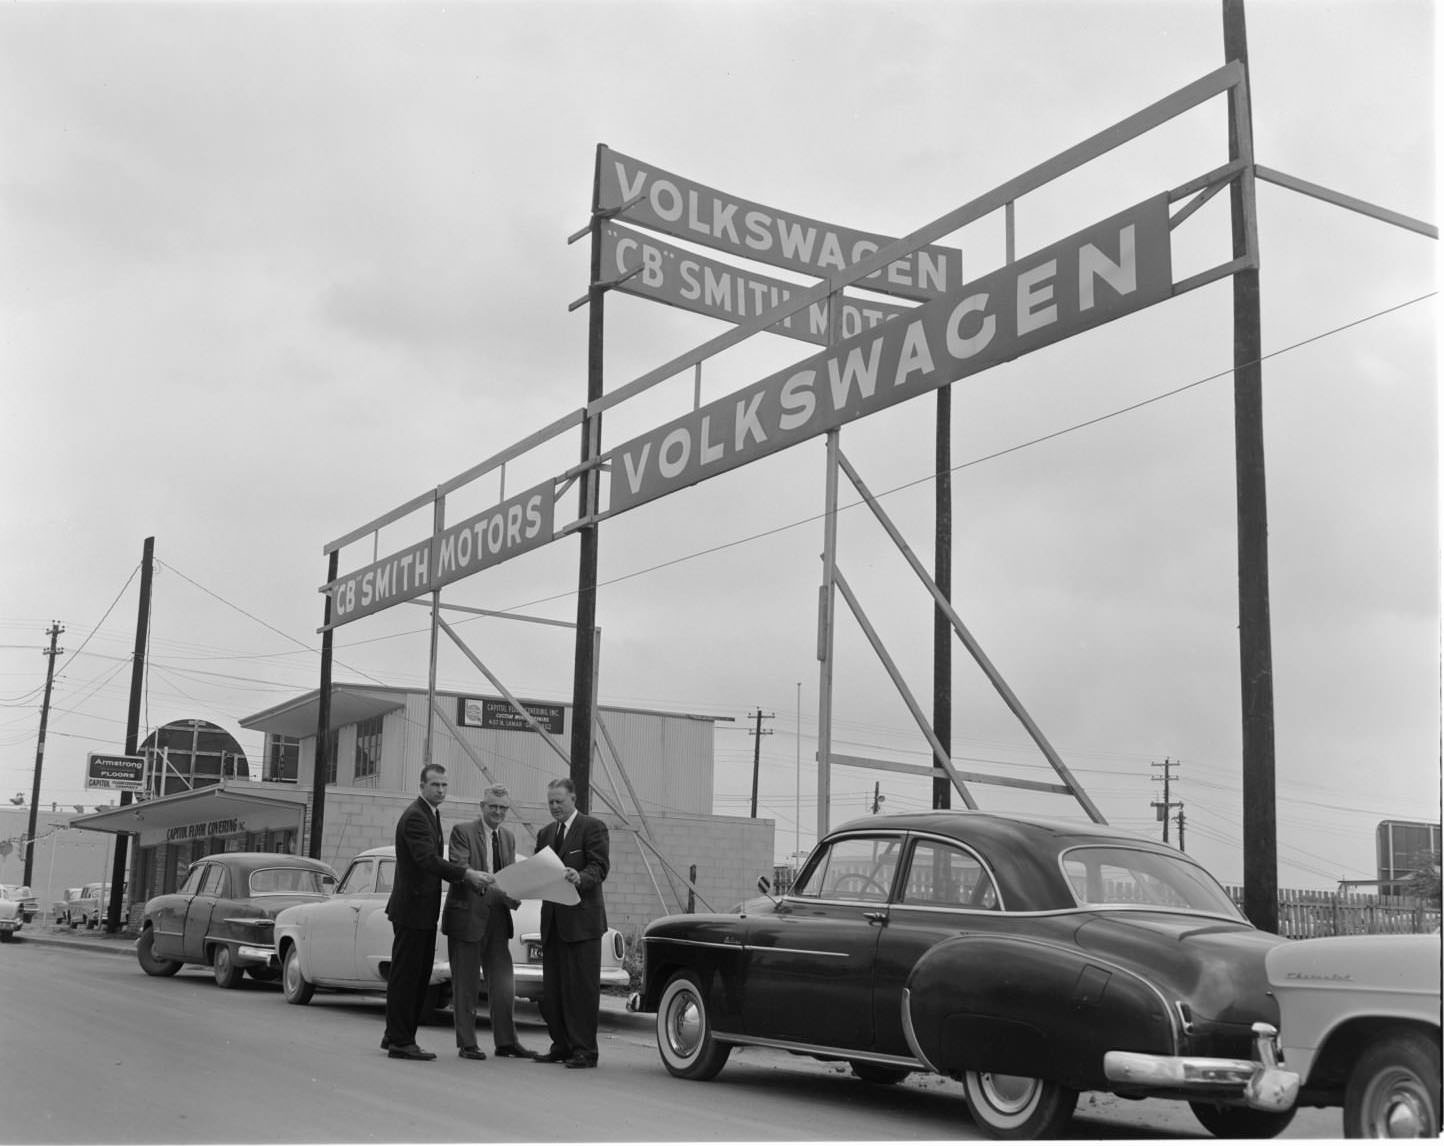 The exterior of CB Smith Volkswagen Motors, Austin, 1960. There are a few cars parked next to the sign advertisement. All three of the men are wearing suits.